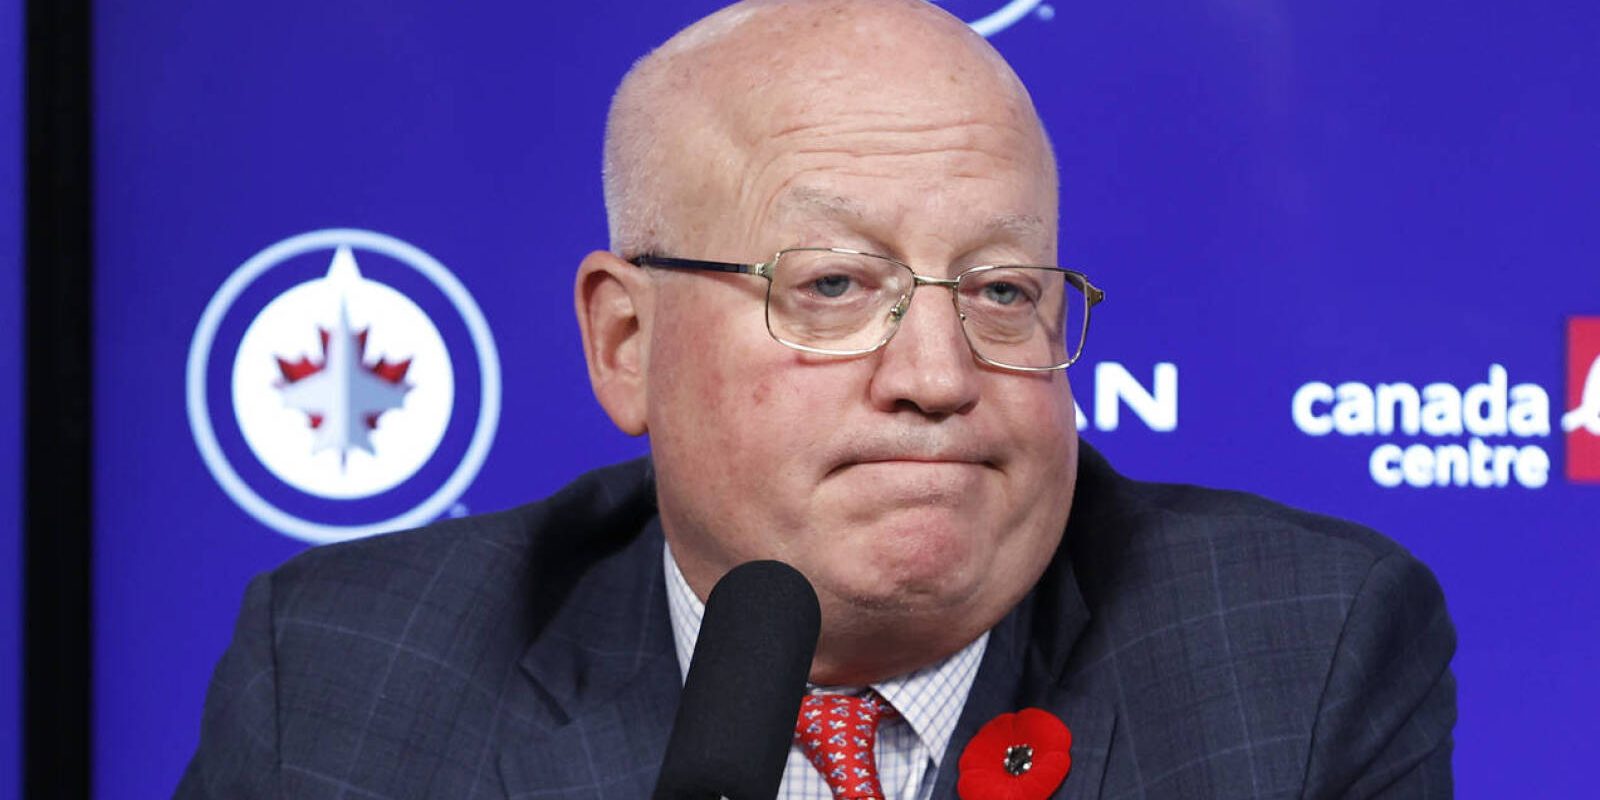 Nov 8, 2022; Winnipeg, Manitoba, CAN; NHL d Deputy Commisioner Bill Daly addresses the media before a game against the Winnipeg Jets and Dallas Stars at Canada Life Centre. Mandatory Credit: James Carey Lauder-USA TODAY Sports